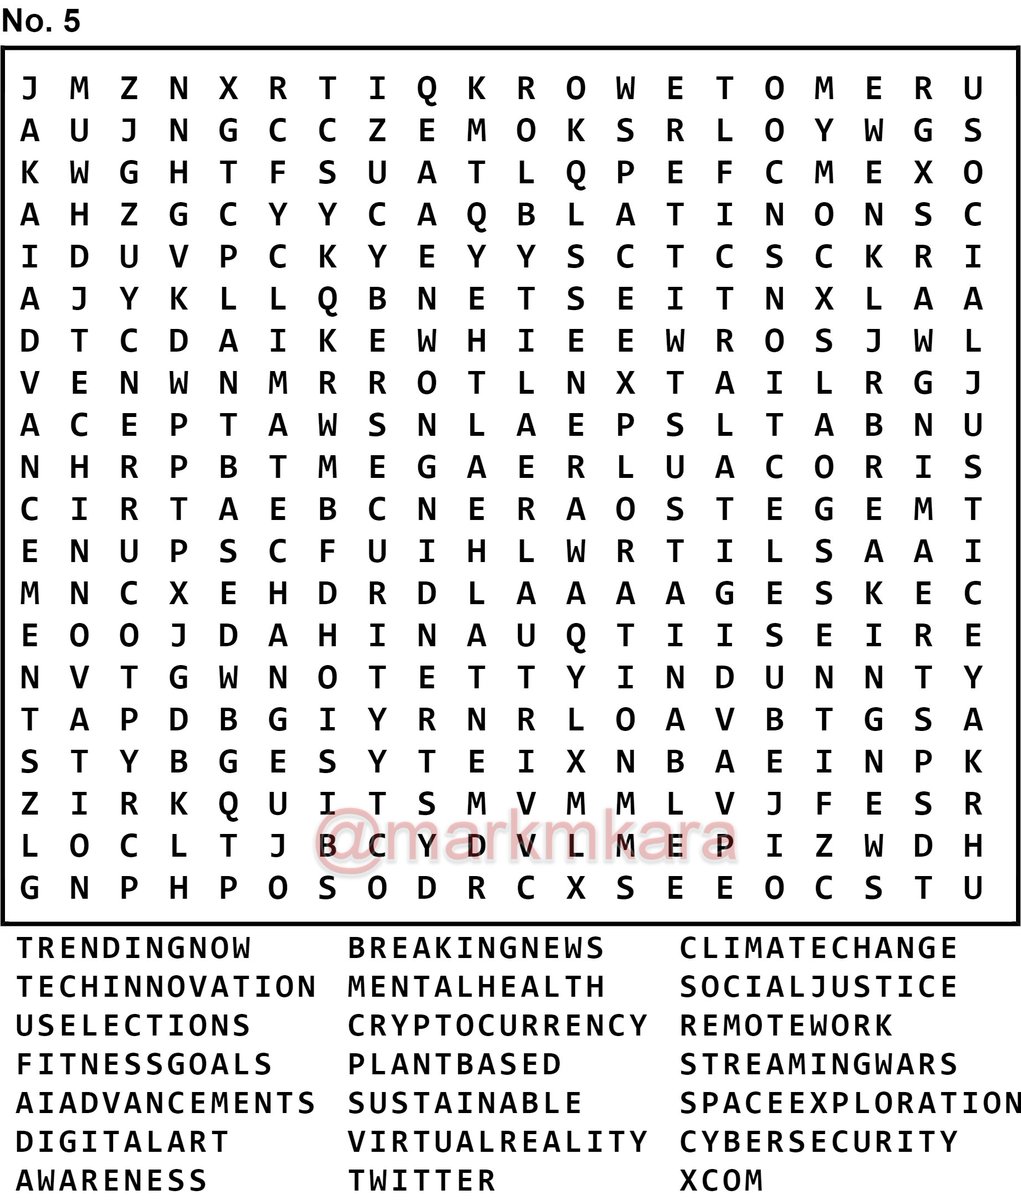 a word search hunt for fans.
#TrendingNow #BreakingNews #ClimateChange #TechInnovation #MentalHealth #SocialJustice #USElections #Cryptocurrency #RemoteWork #FitnessGoals #PlantBased #StreamingWars #AIAdvancements #Sustainable #SpaceExploration #DigitalArt #VirtualReality